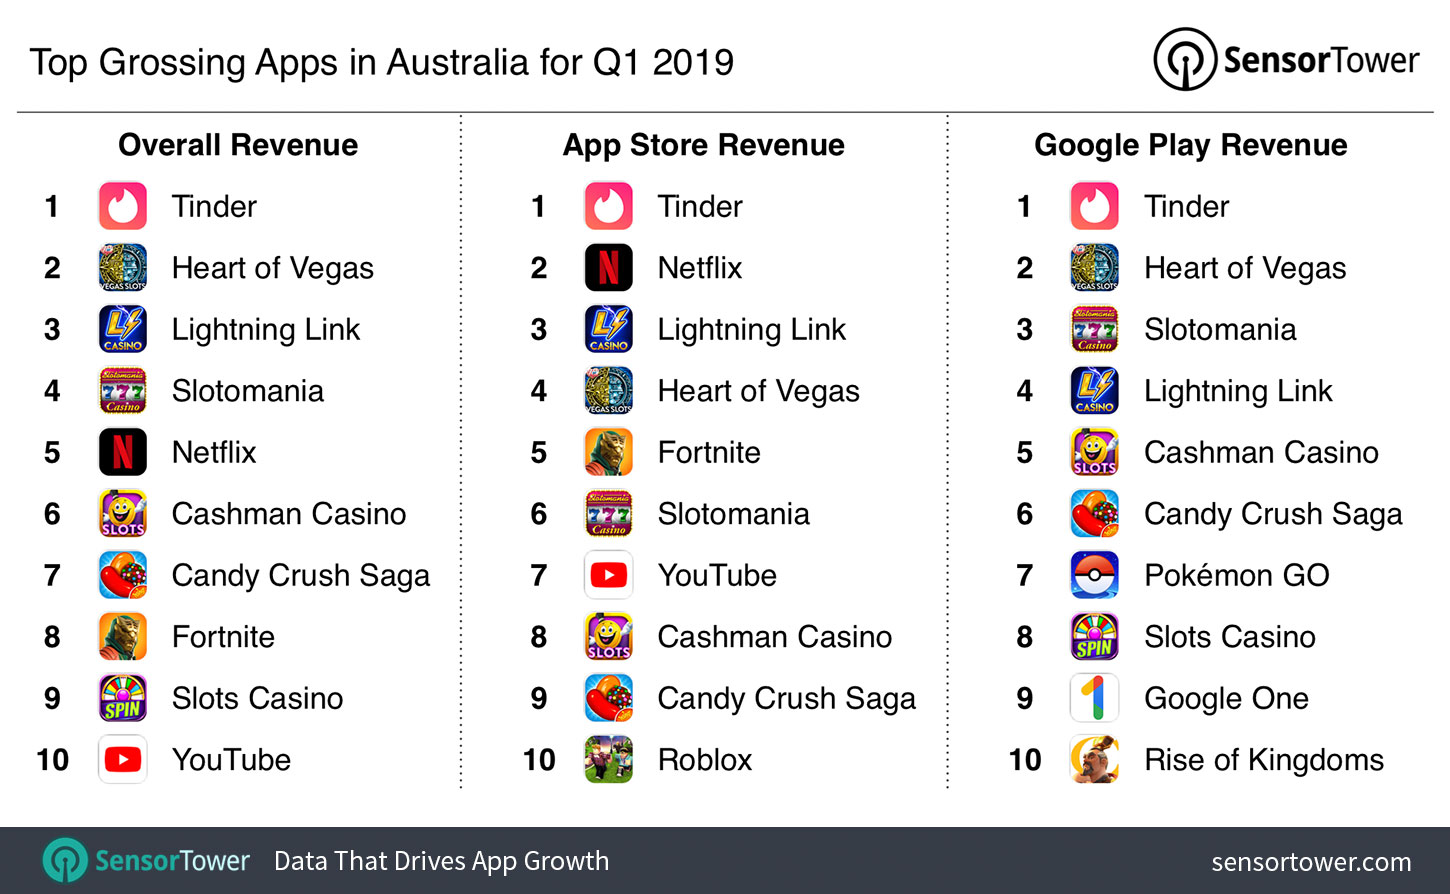 Top Grossing Apps in Australia for Q1 2019